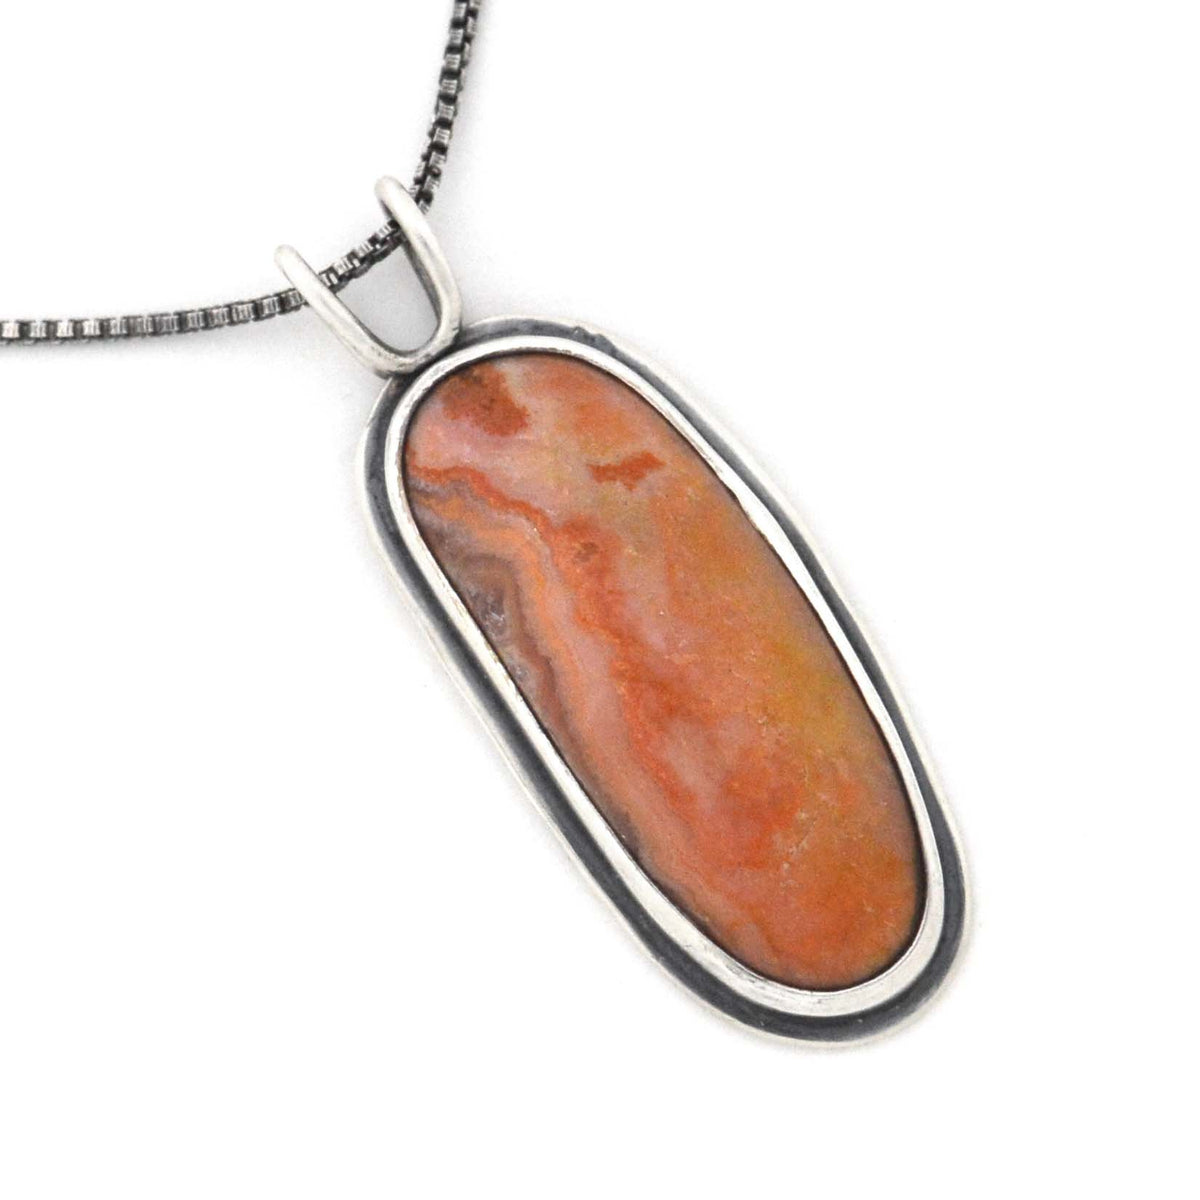 Marquette Lake Superior Agate Drop Pendant No. 1 - Silver Pendant   3783 - handmade by Beth Millner Jewelry